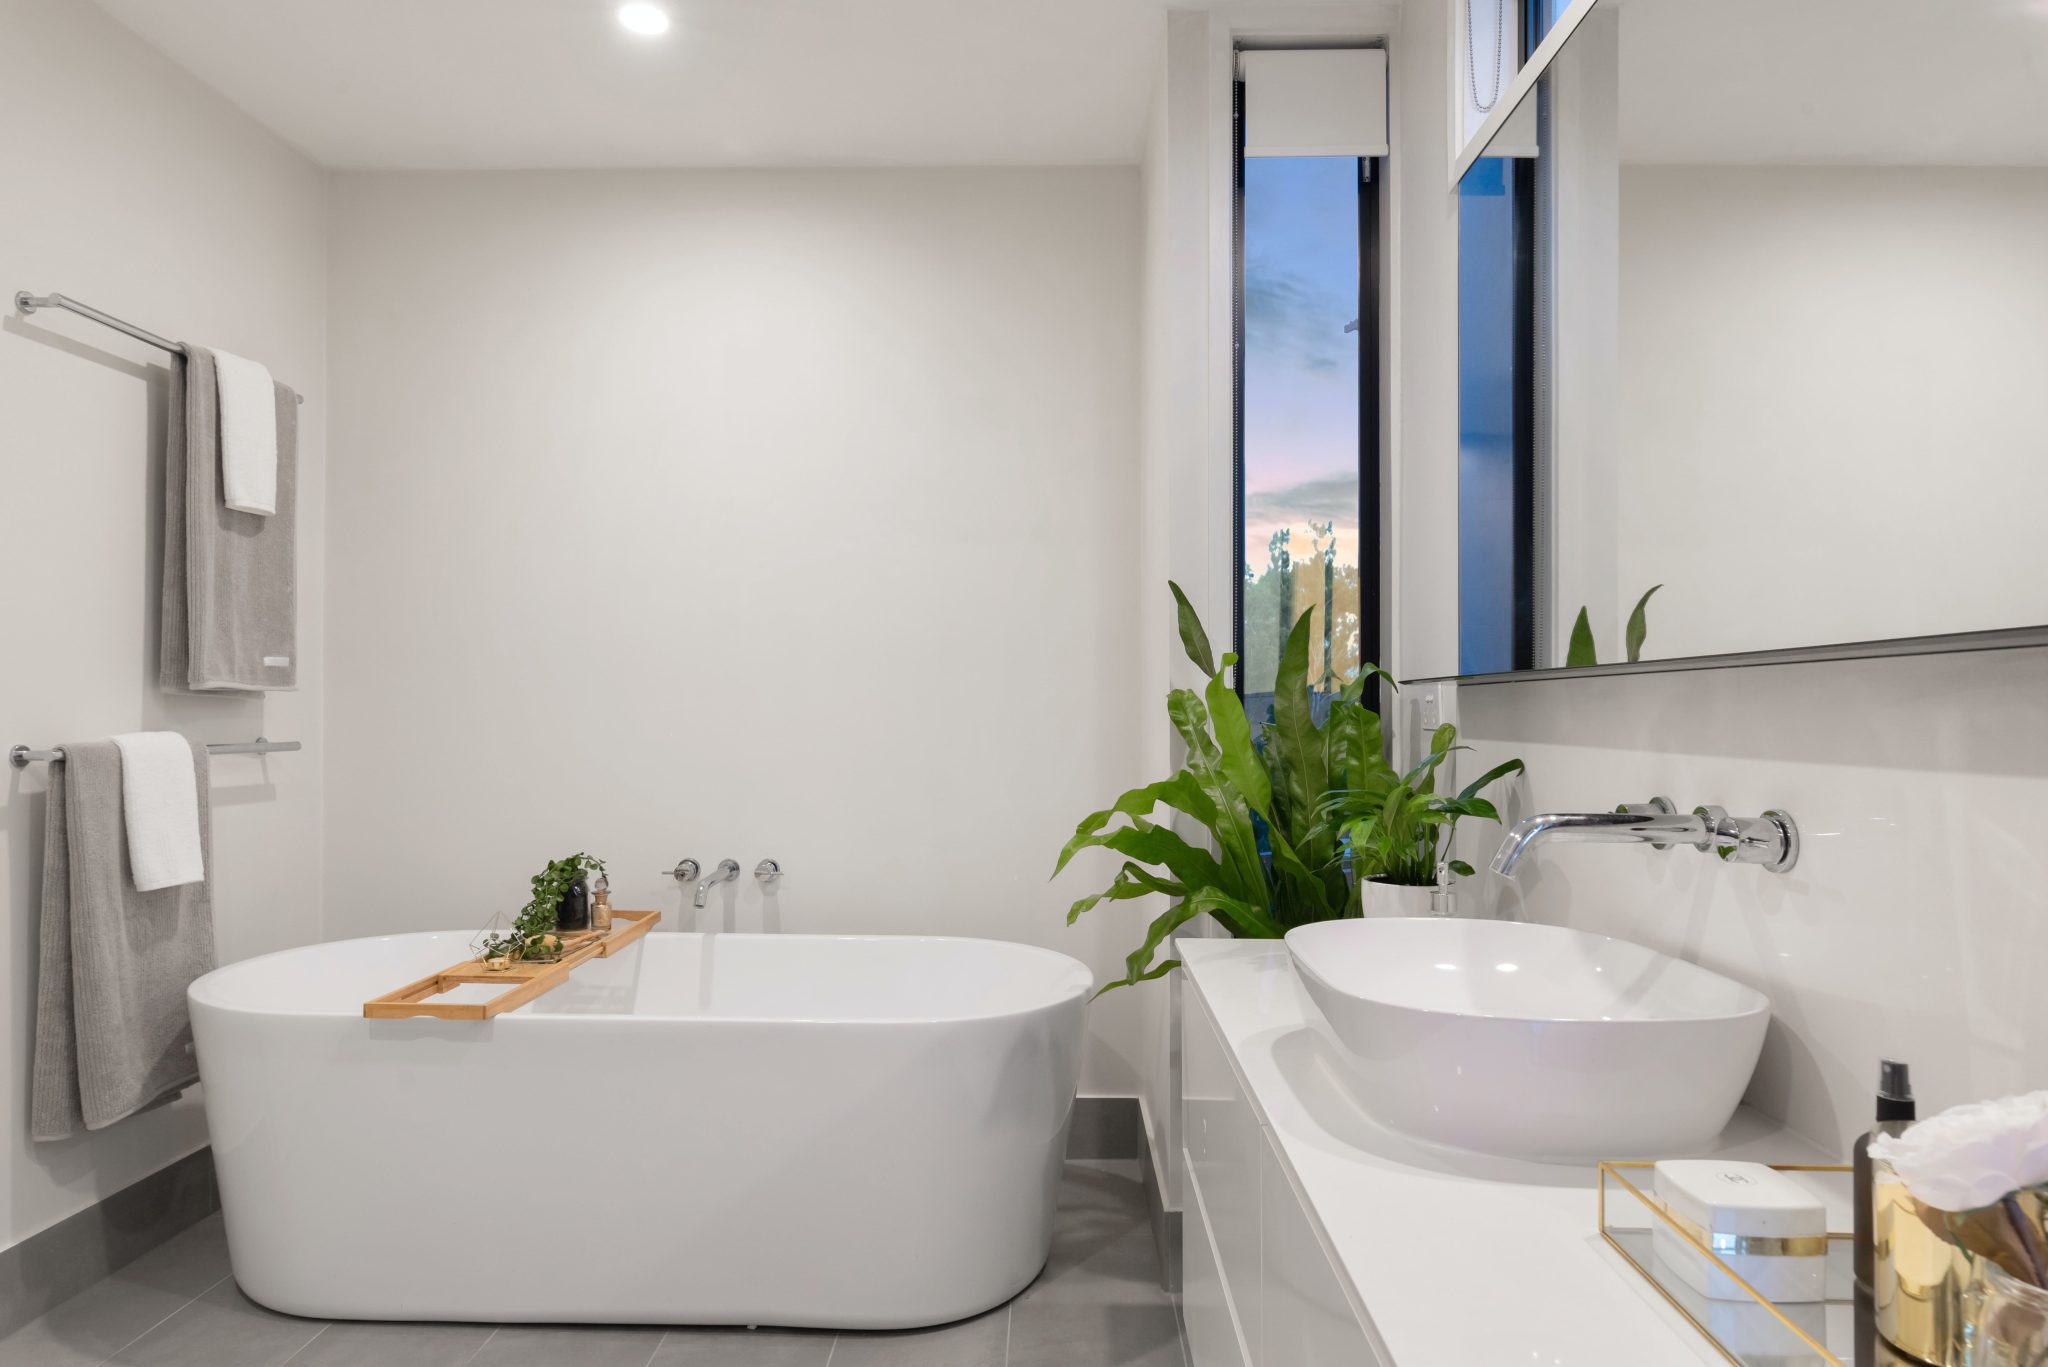 What are Bathtubs Made of? – A List of the 10 Best Bathtub Materials in Australia